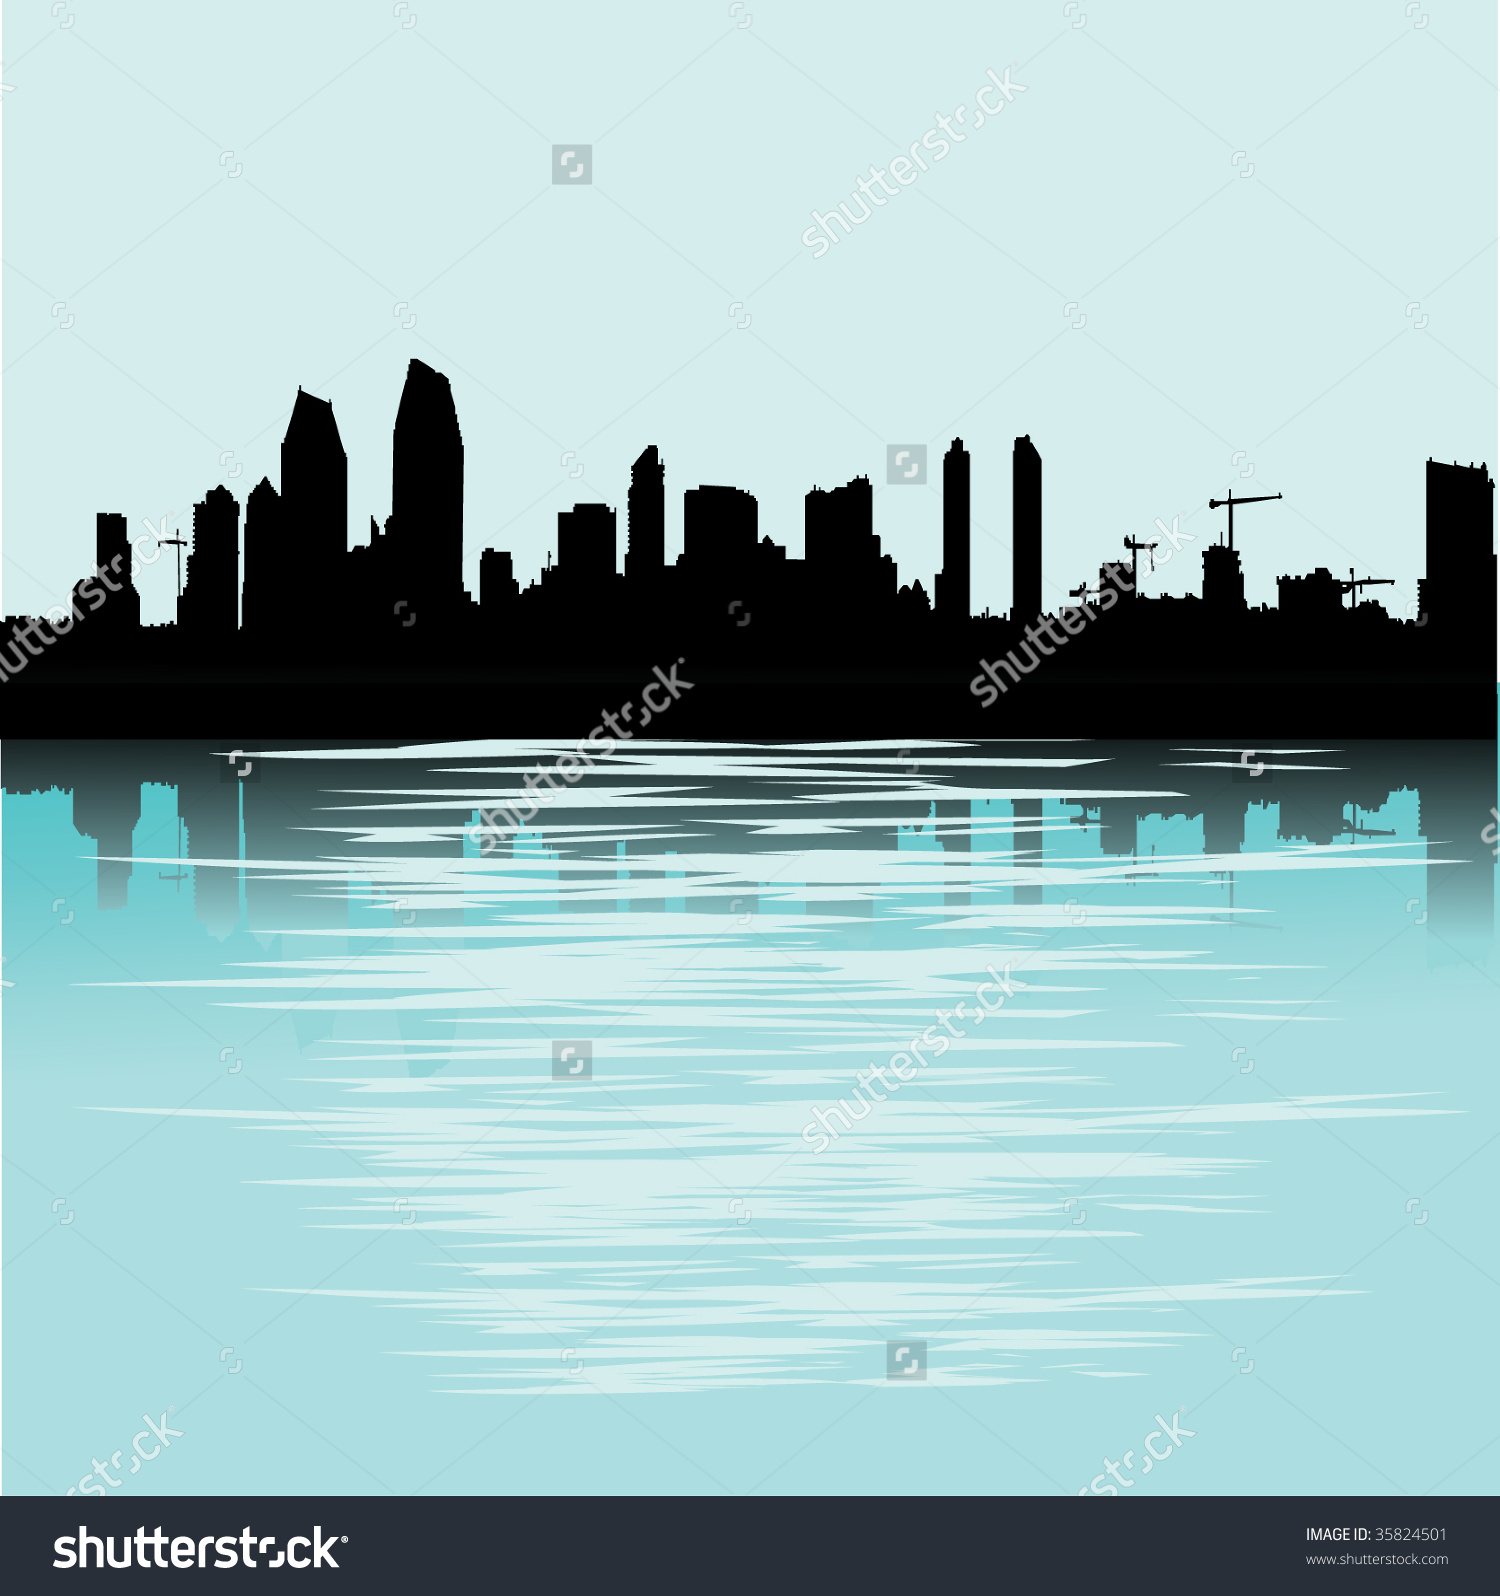 Water reflection clipart.